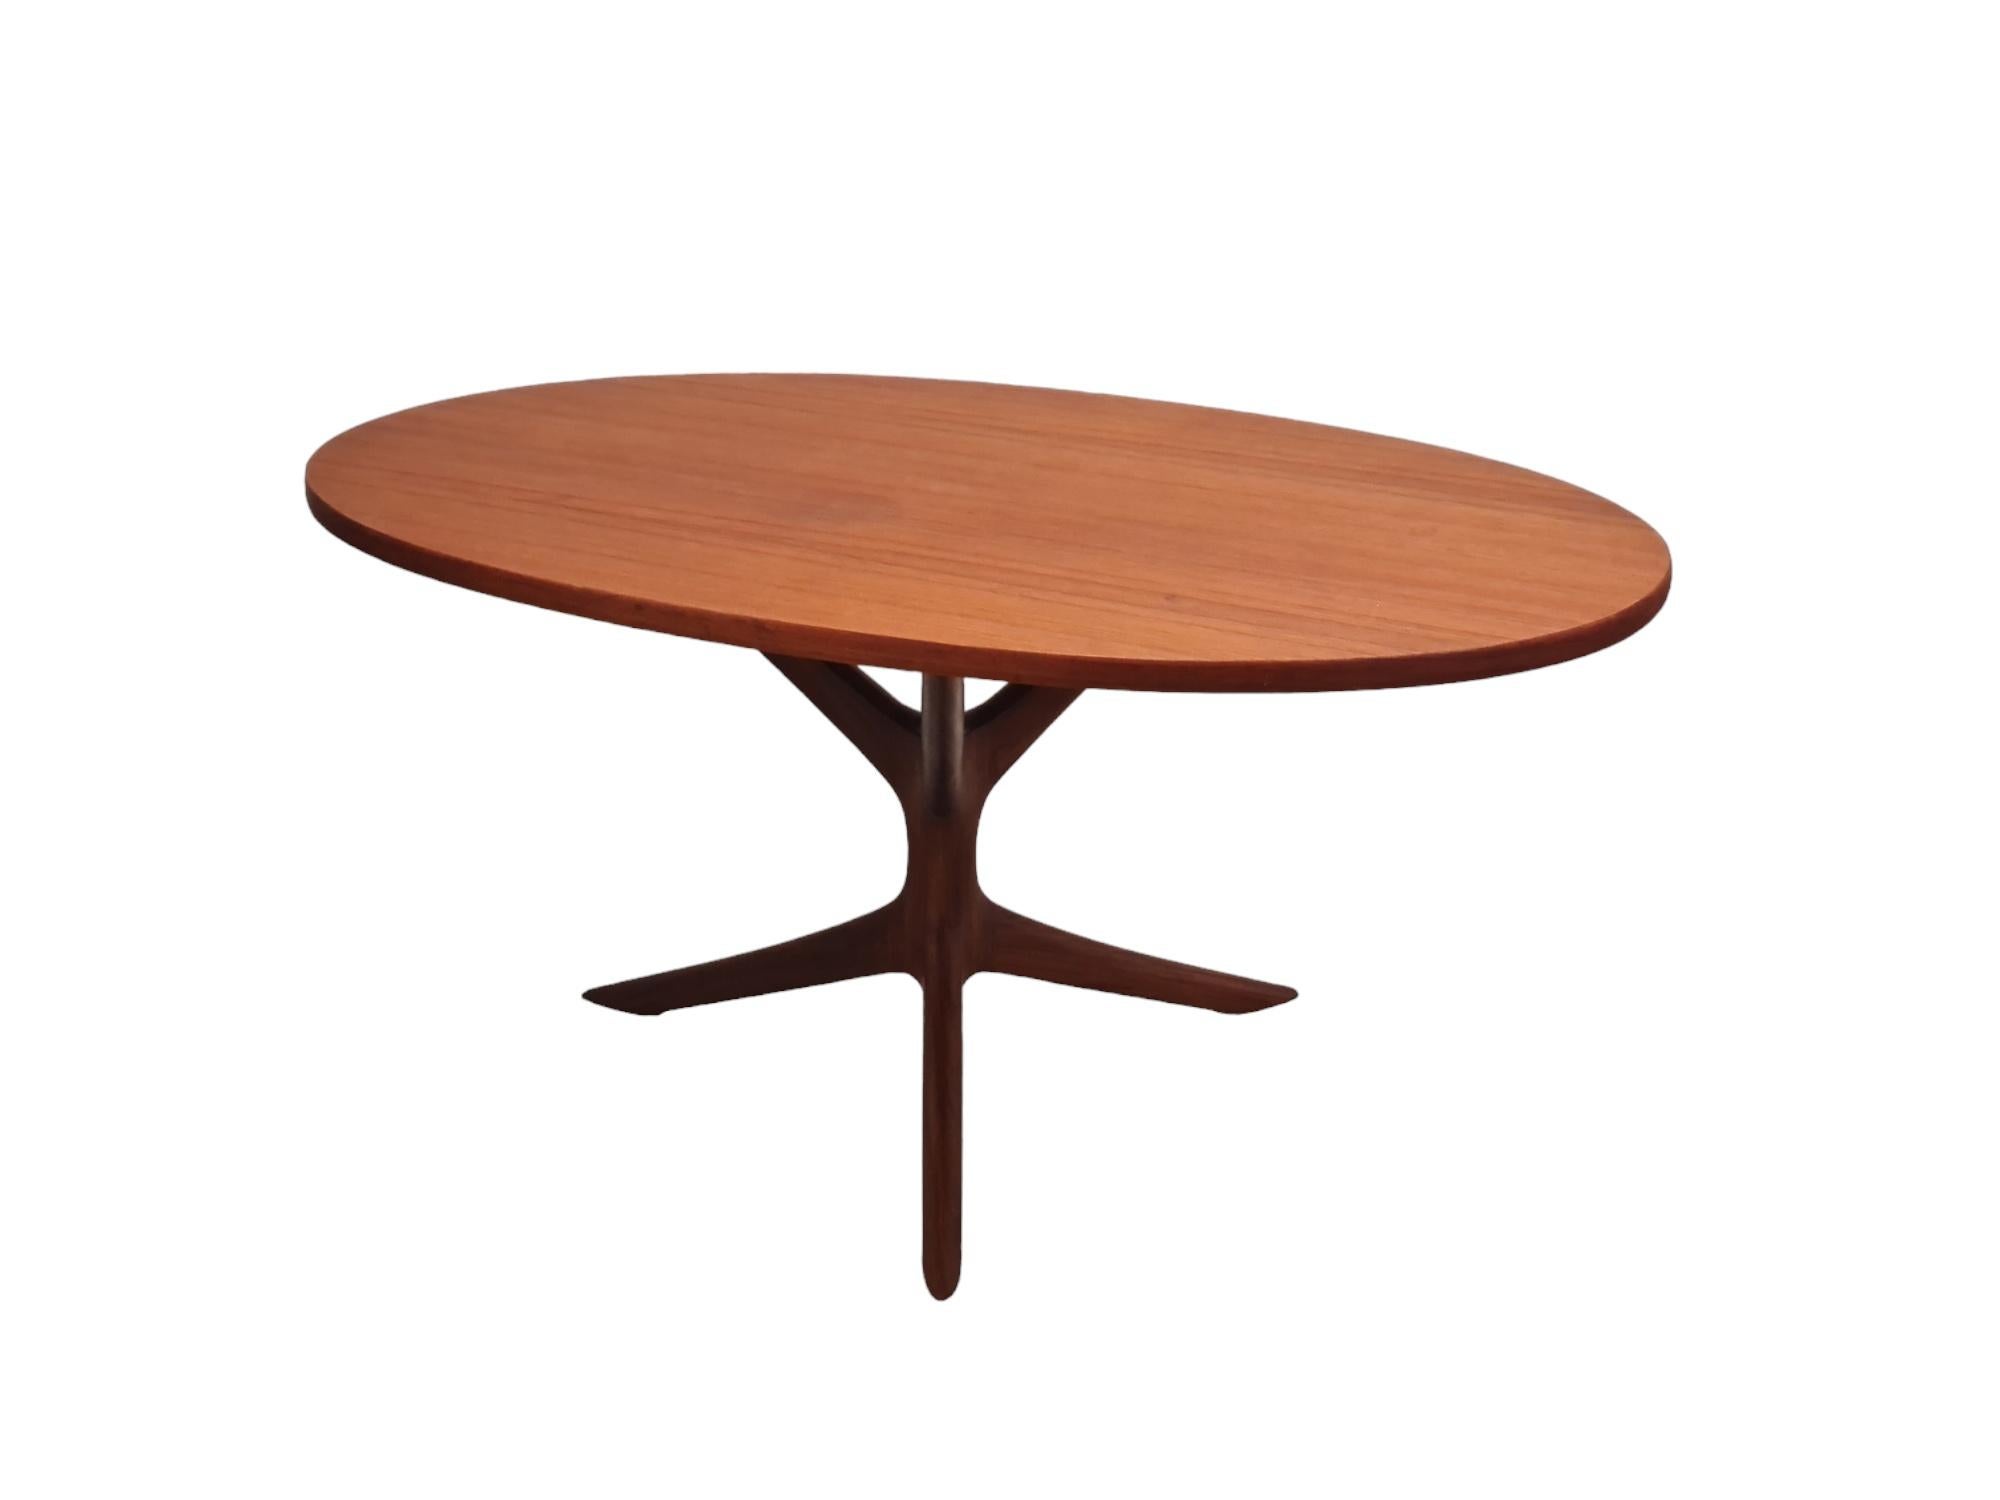 Lea Nevanlinna Sculptural Coffee Table, 1950s In Good Condition For Sale In Helsinki, FI